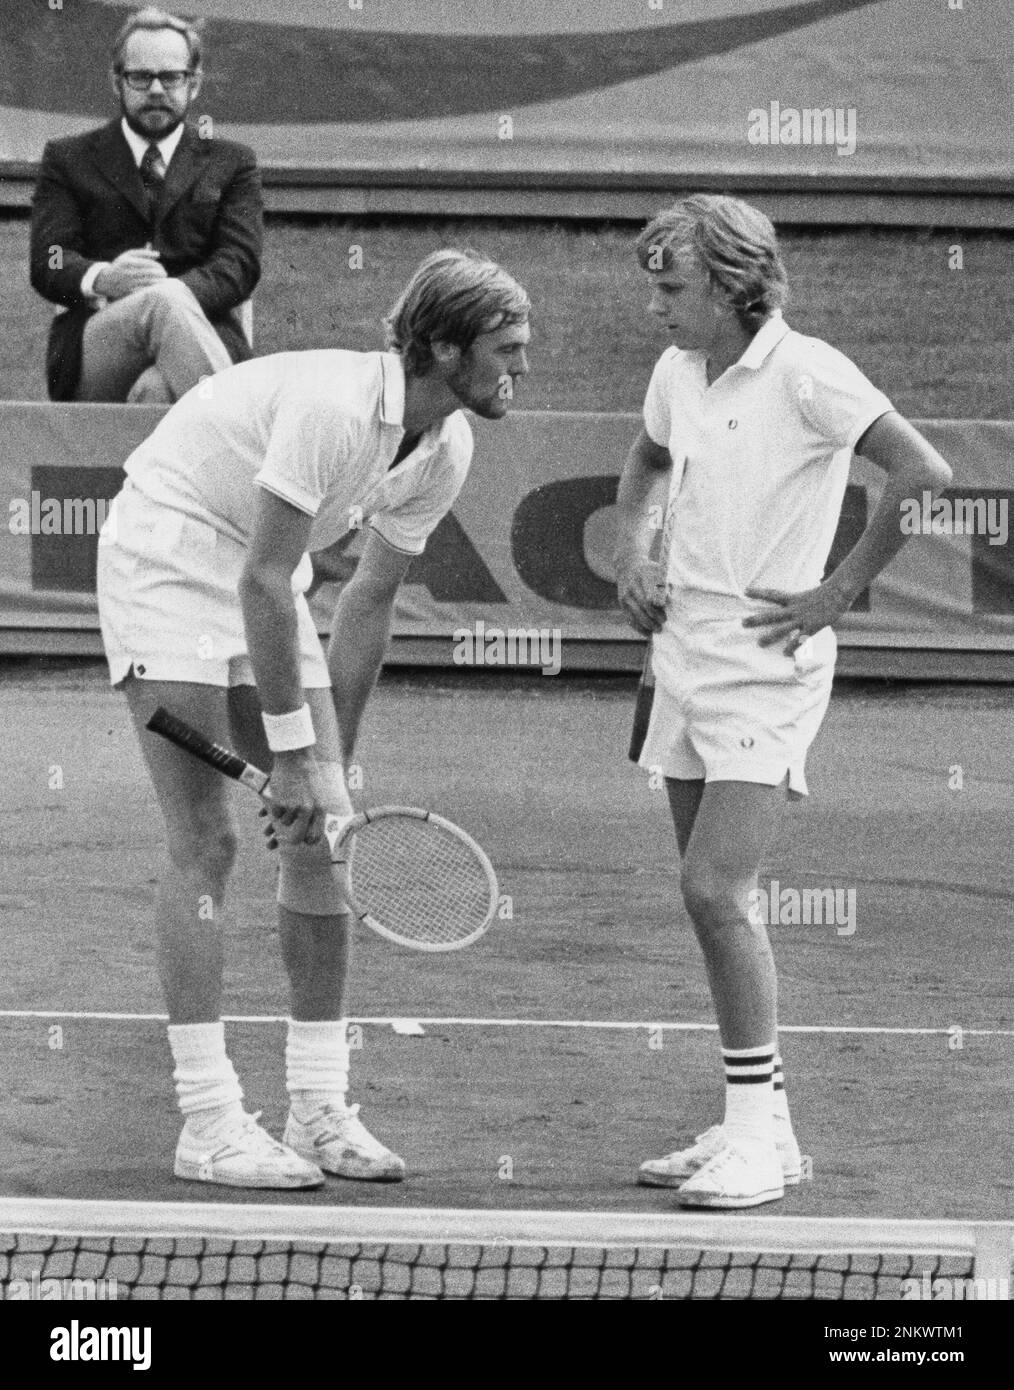 BASTAD 1972-05-06 Bjorn Borg, right, and Ove Bengtson seen in their ...